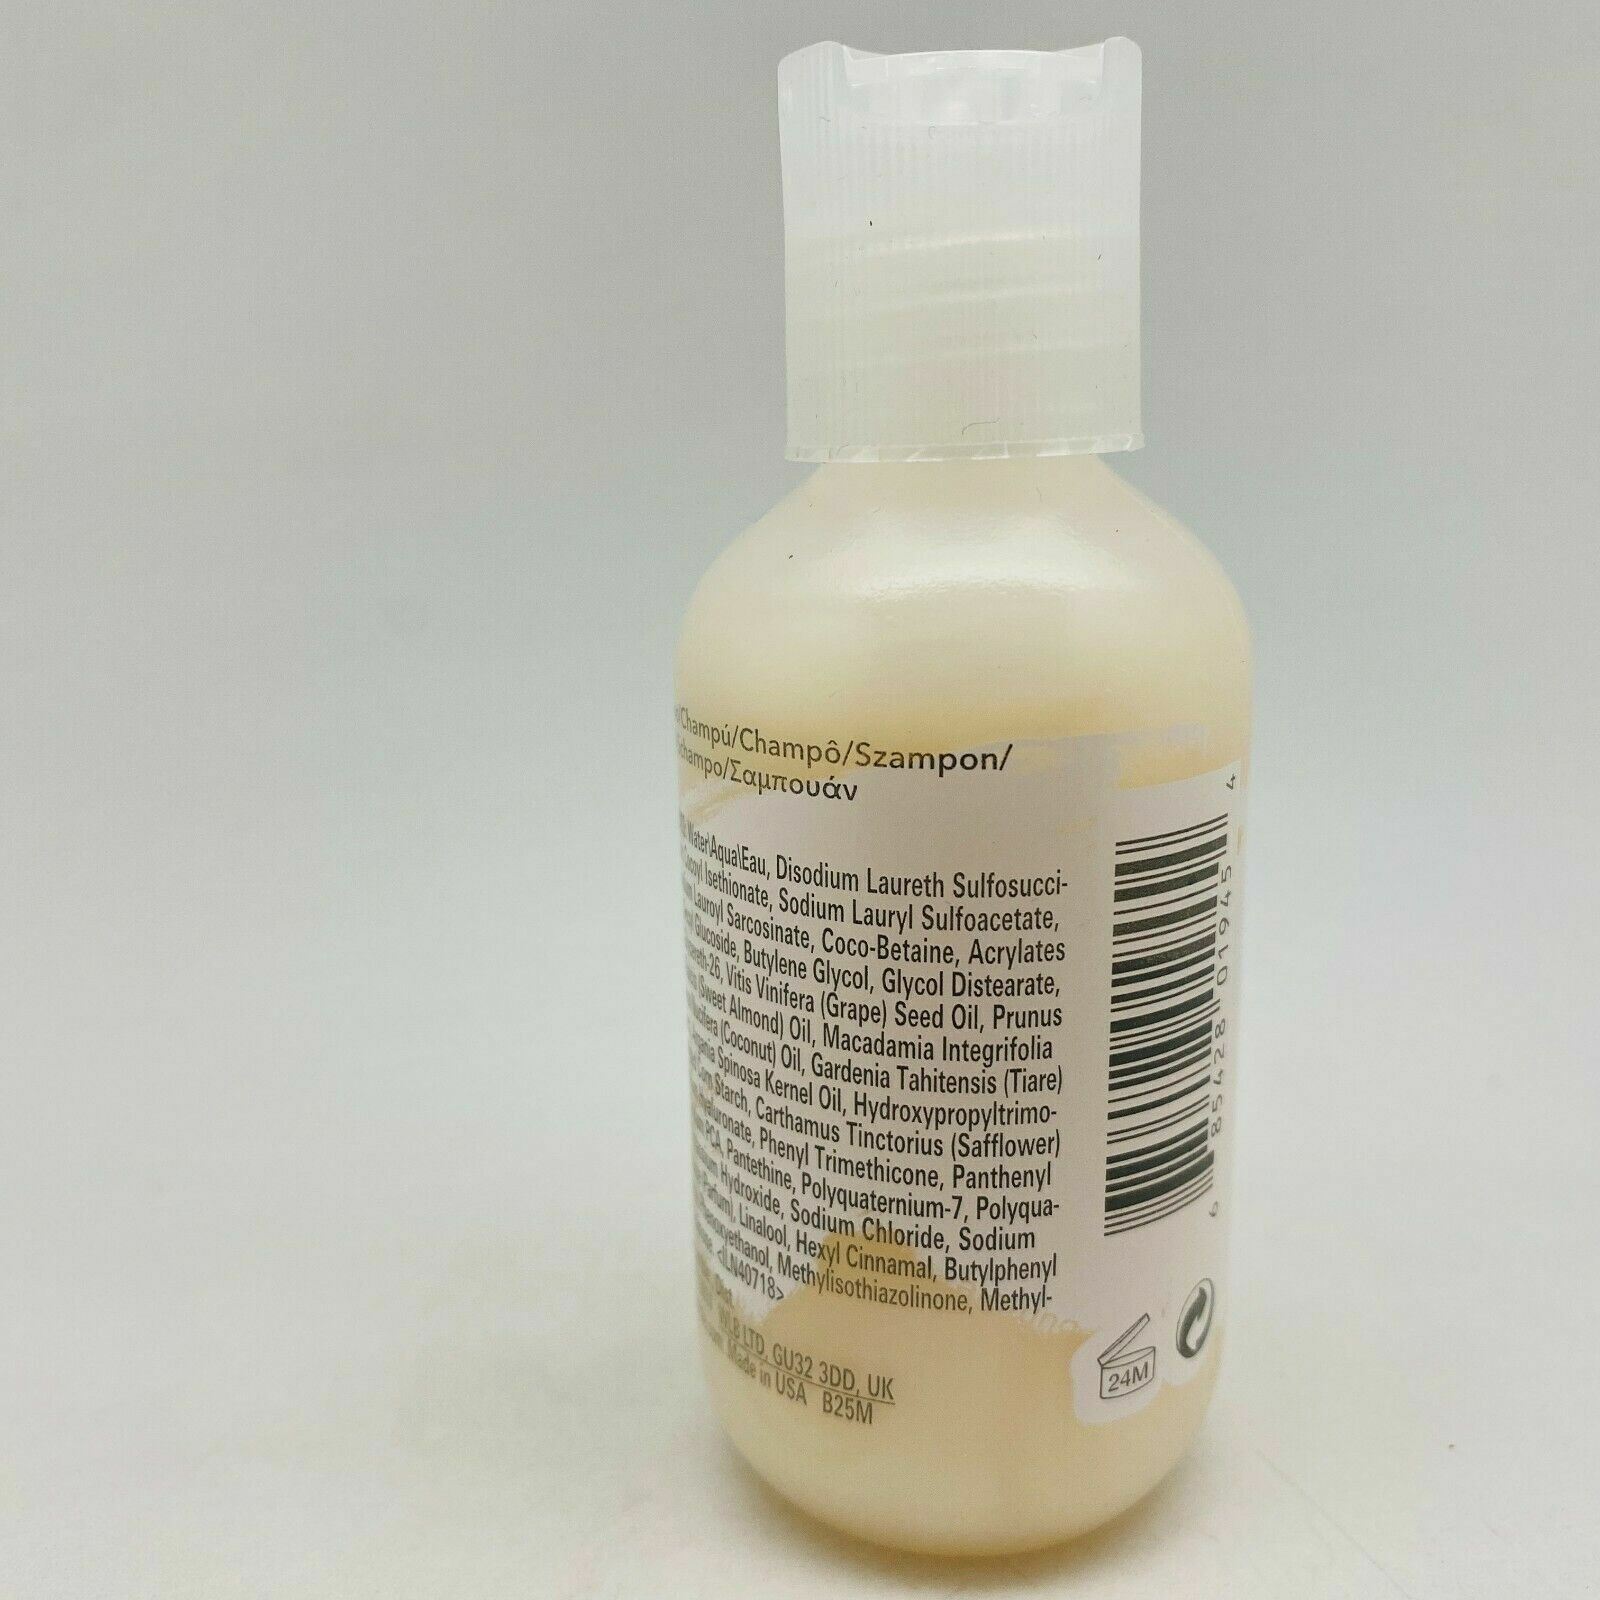 Bumble And Bumble Hairdresser's Invisible Oil Shampoo - 2 oz - NWOB